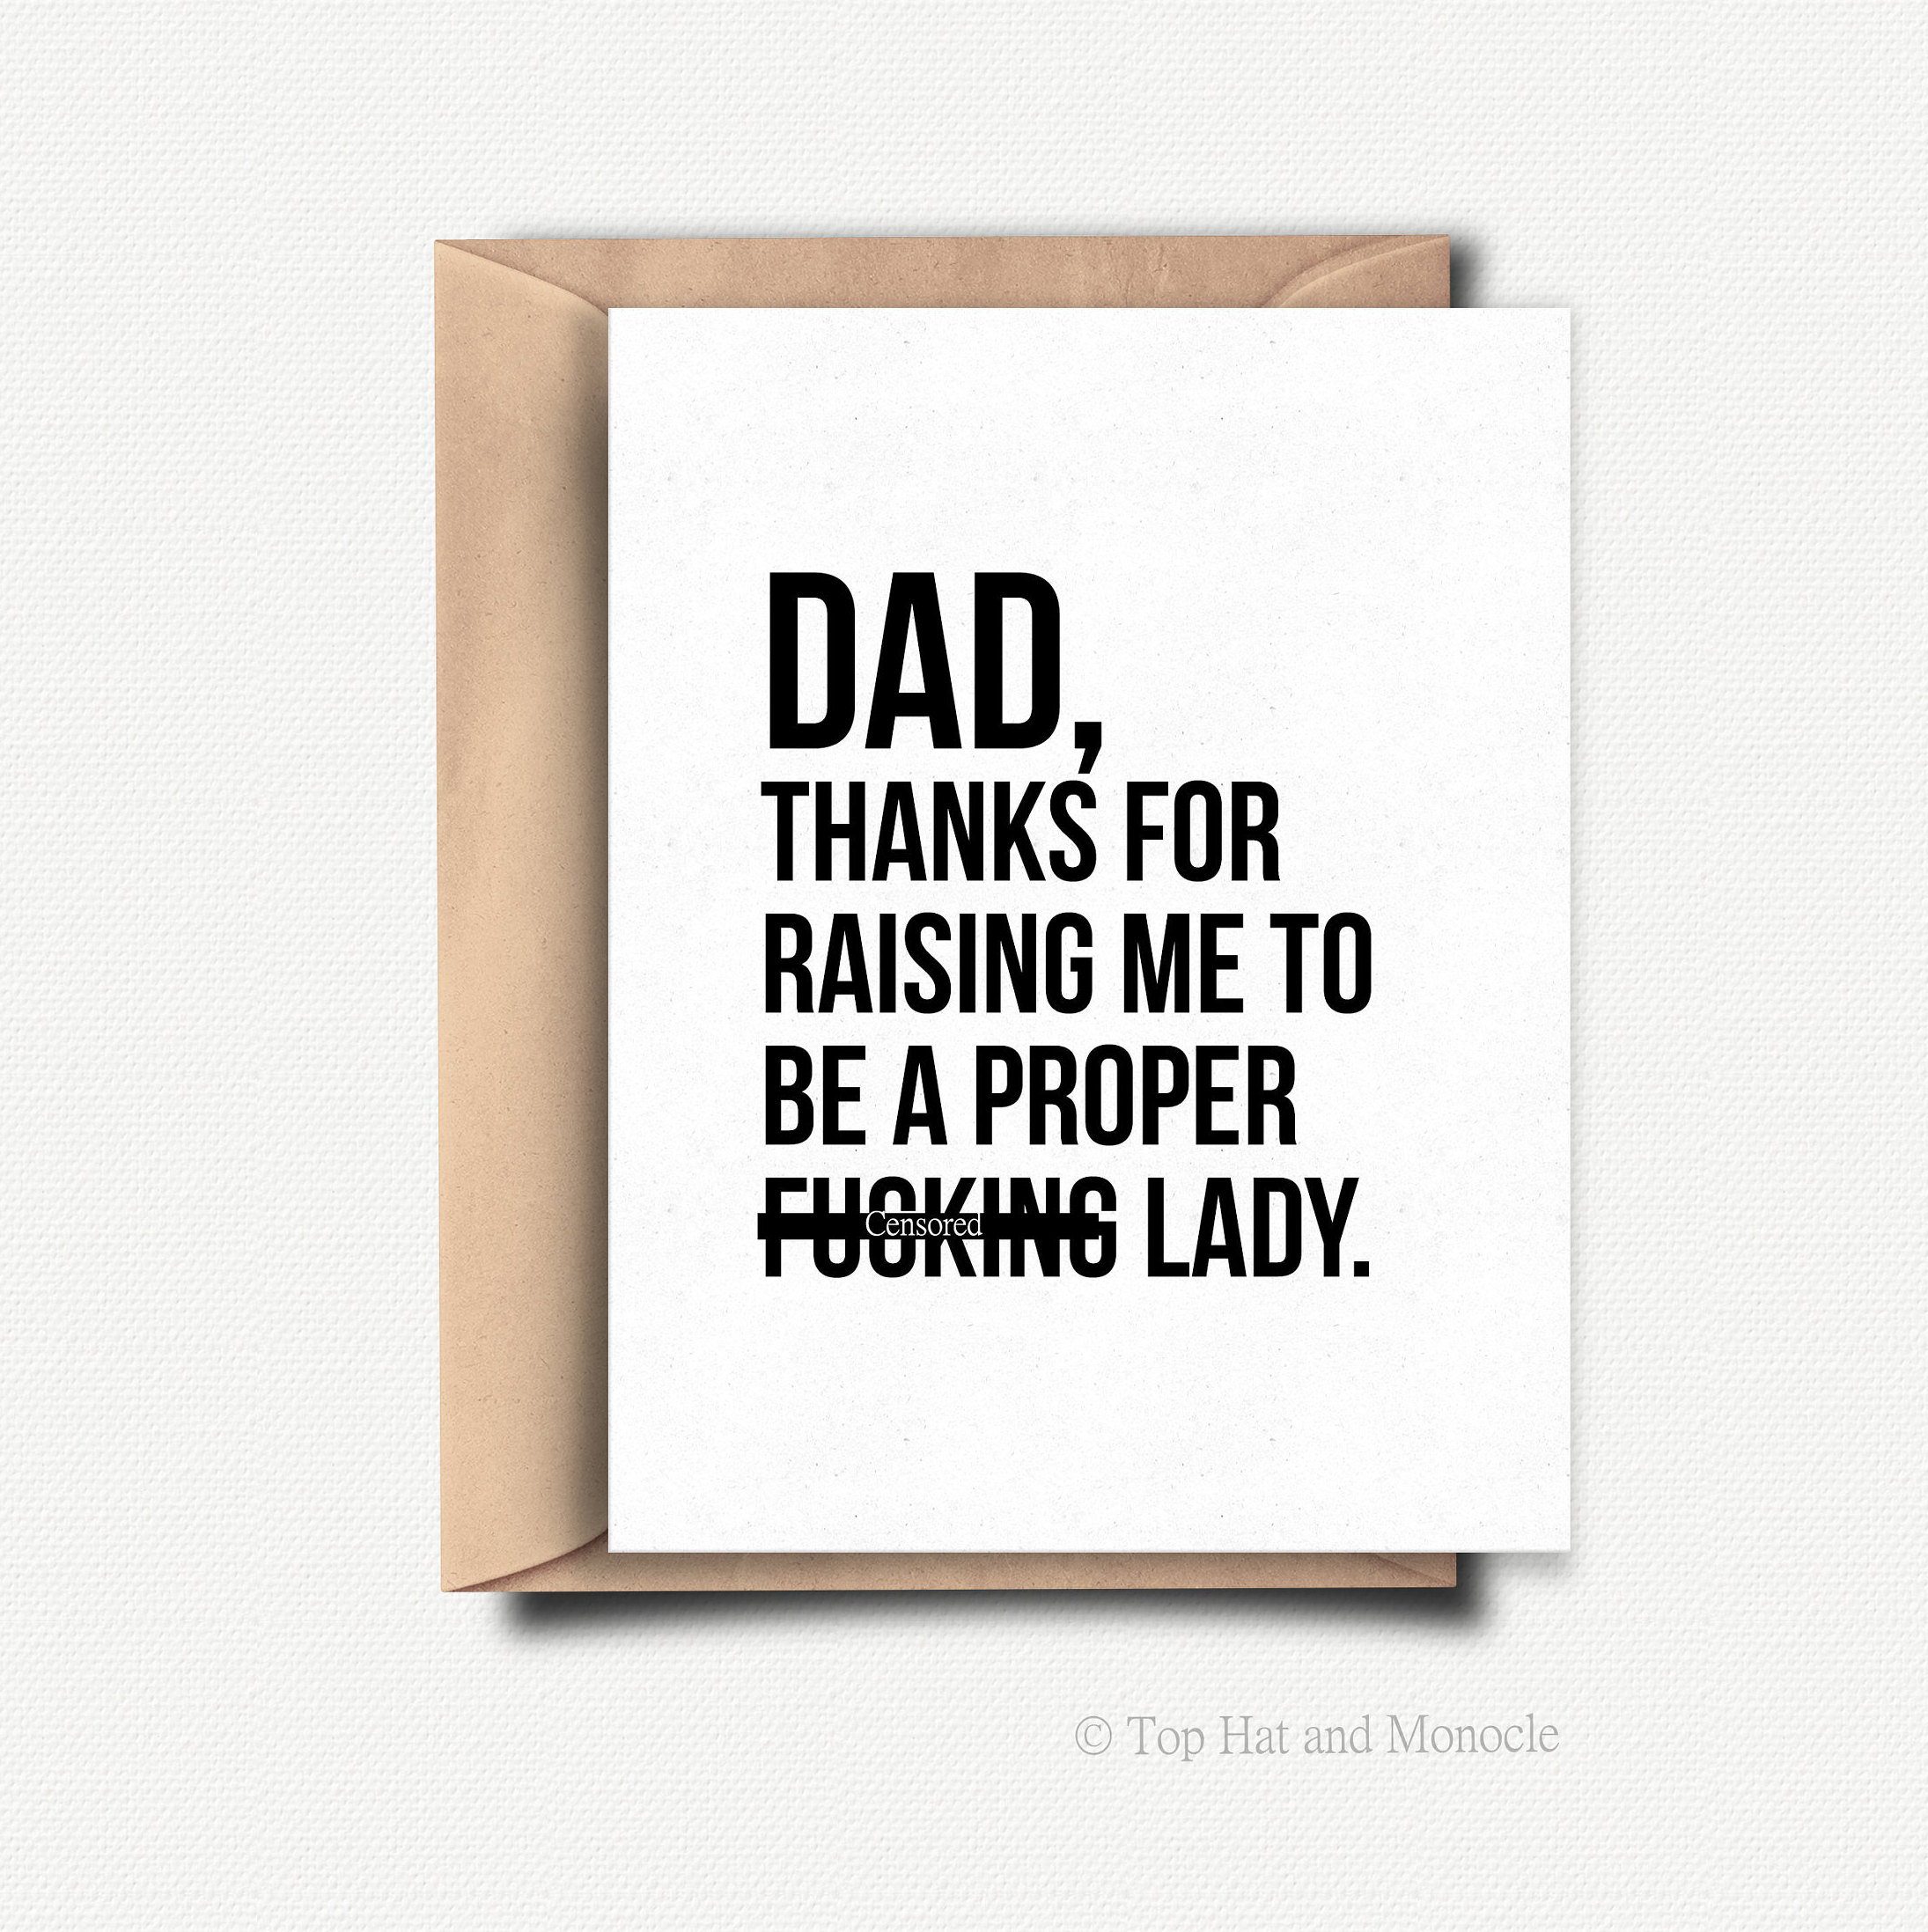 Father Birthday Card Ideas Funny Fathers Day Card Funny Fathers Day Gift From Daughter Funny Fathers Day Gift Ideas For Dad Birthday Card From Daughter Dad Card